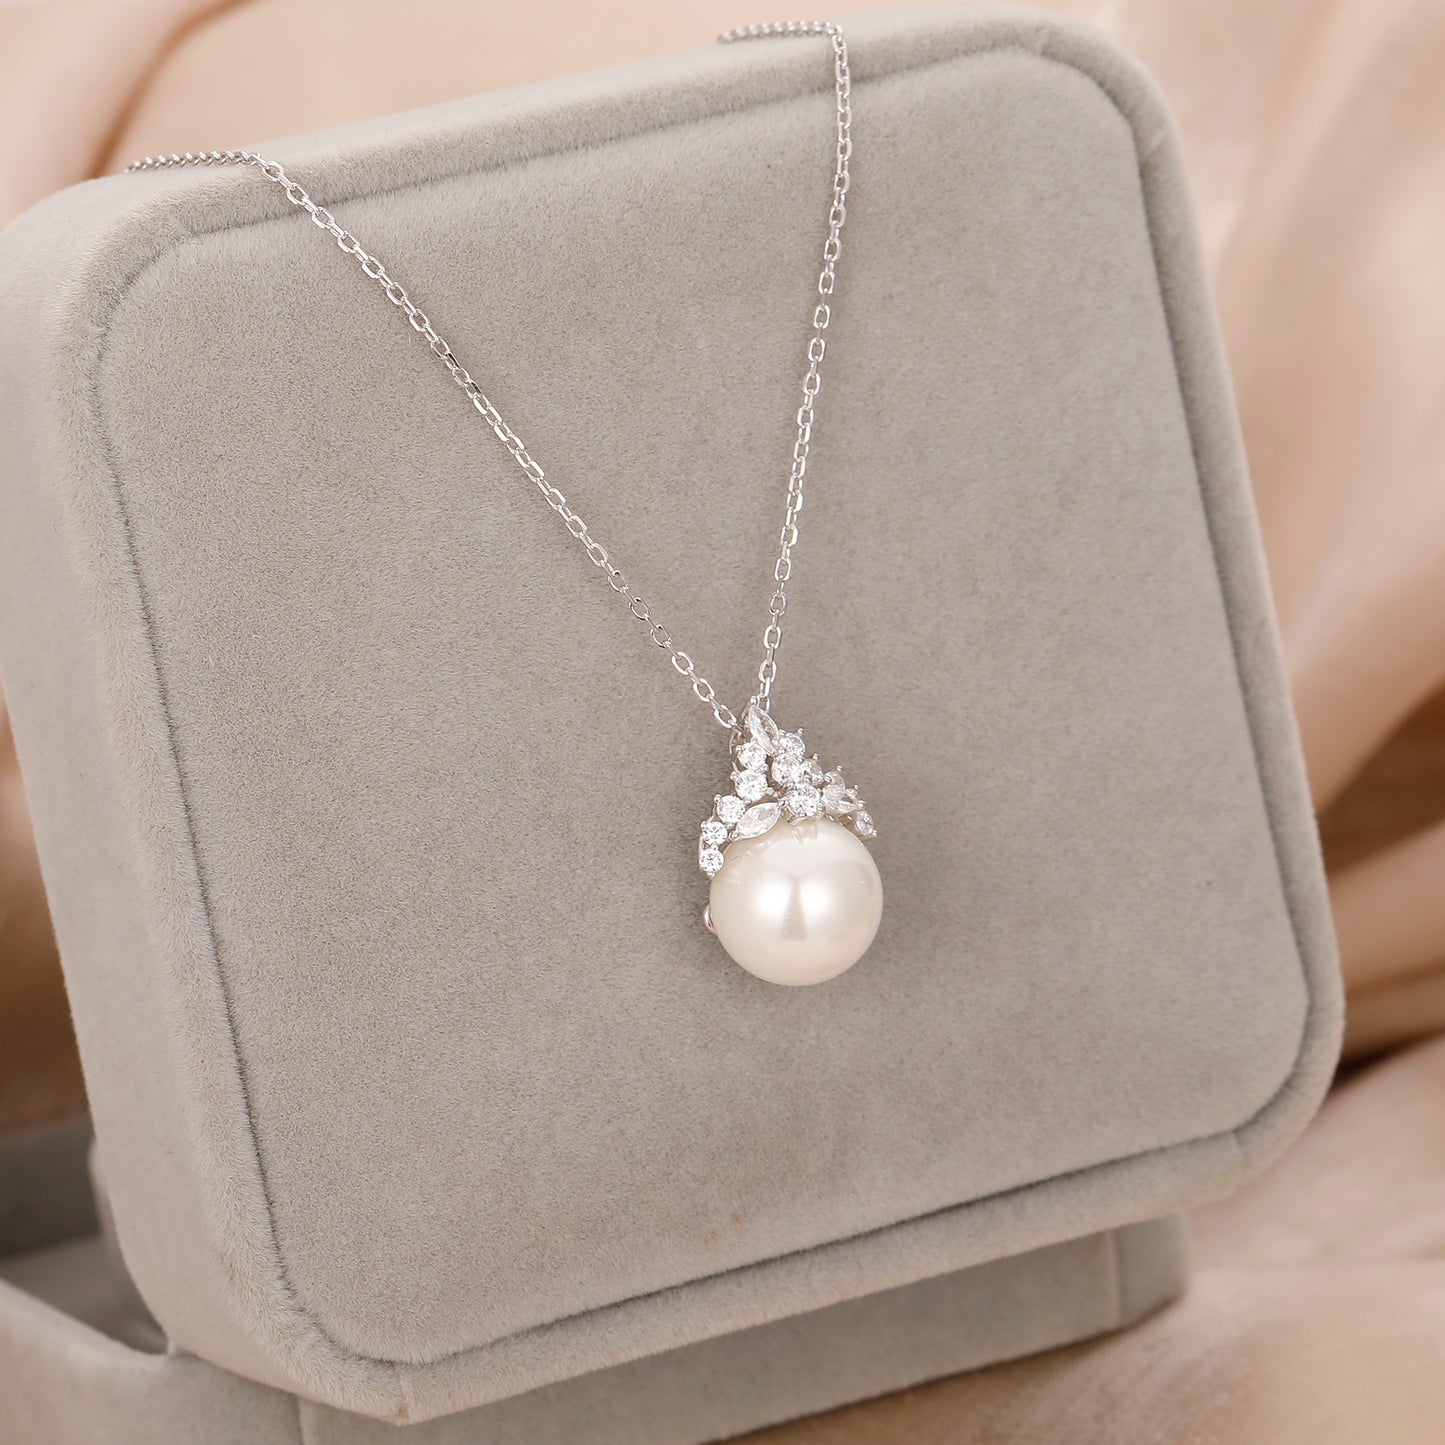 Sterling Silver Necklace, 12mm Round Natural Shell Pearl Necklace, Simulated Diamond Jewelry, Birthday Gifts